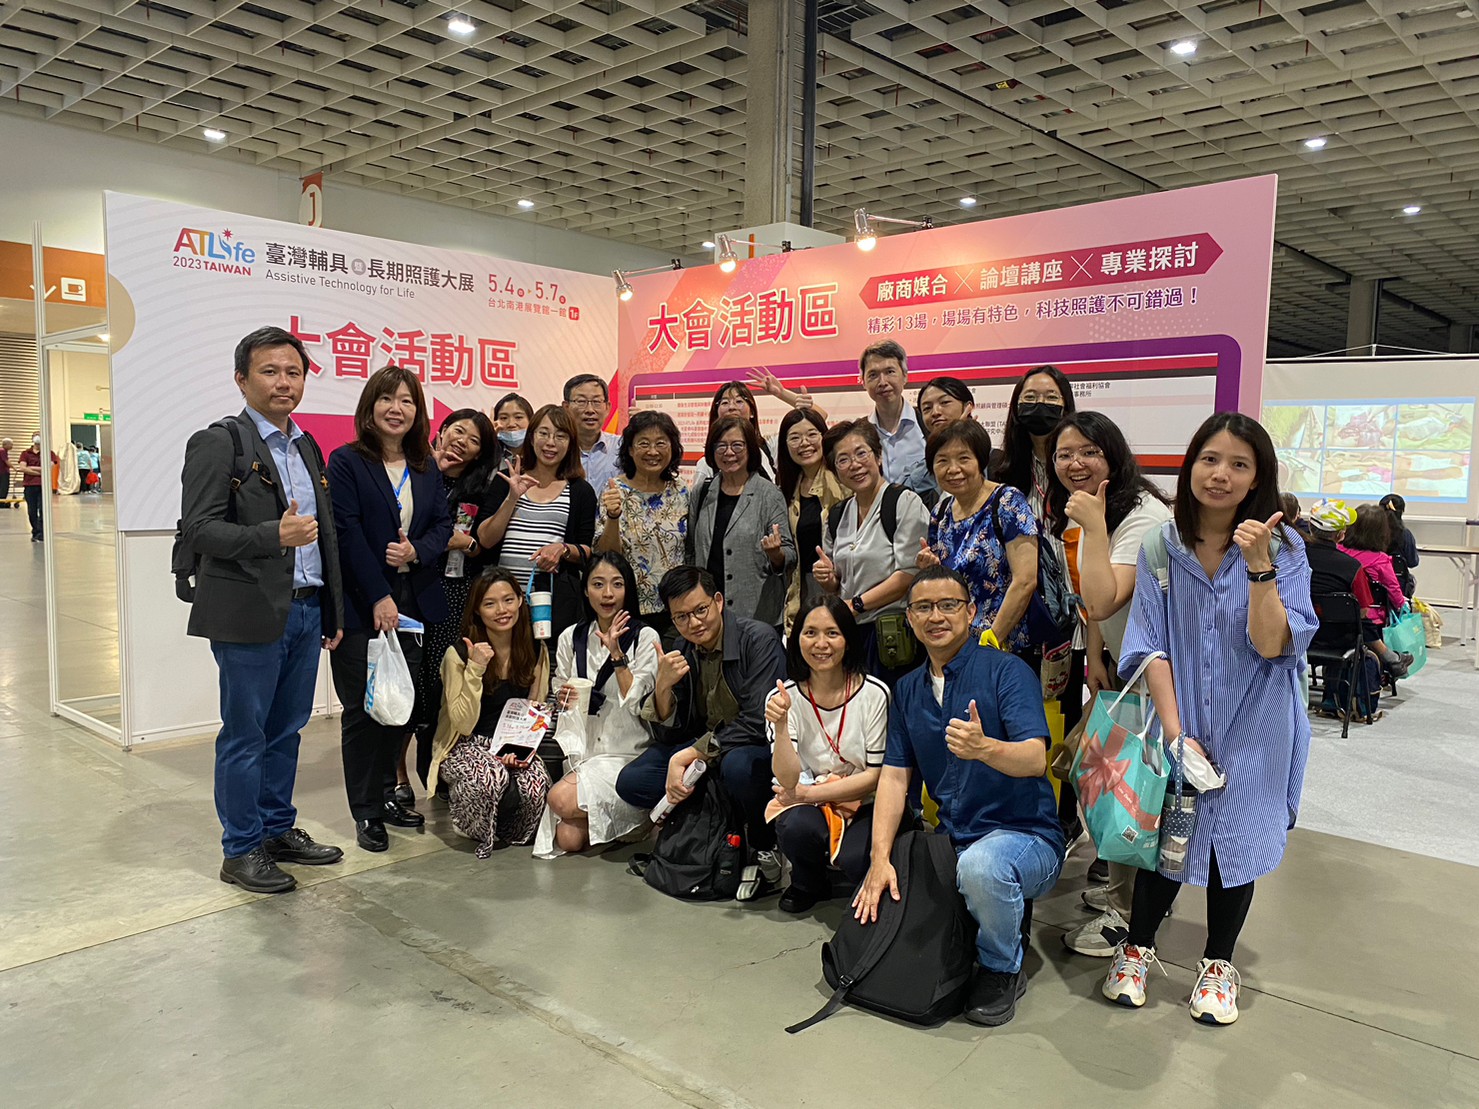 The NYCU Research Center on International Classification of Functioning, Disability and Health (ICF) and Assistive Technology (RICFAT) is hosting the largest international exhibition of the long-term care and assistive device industry in Taiwan.